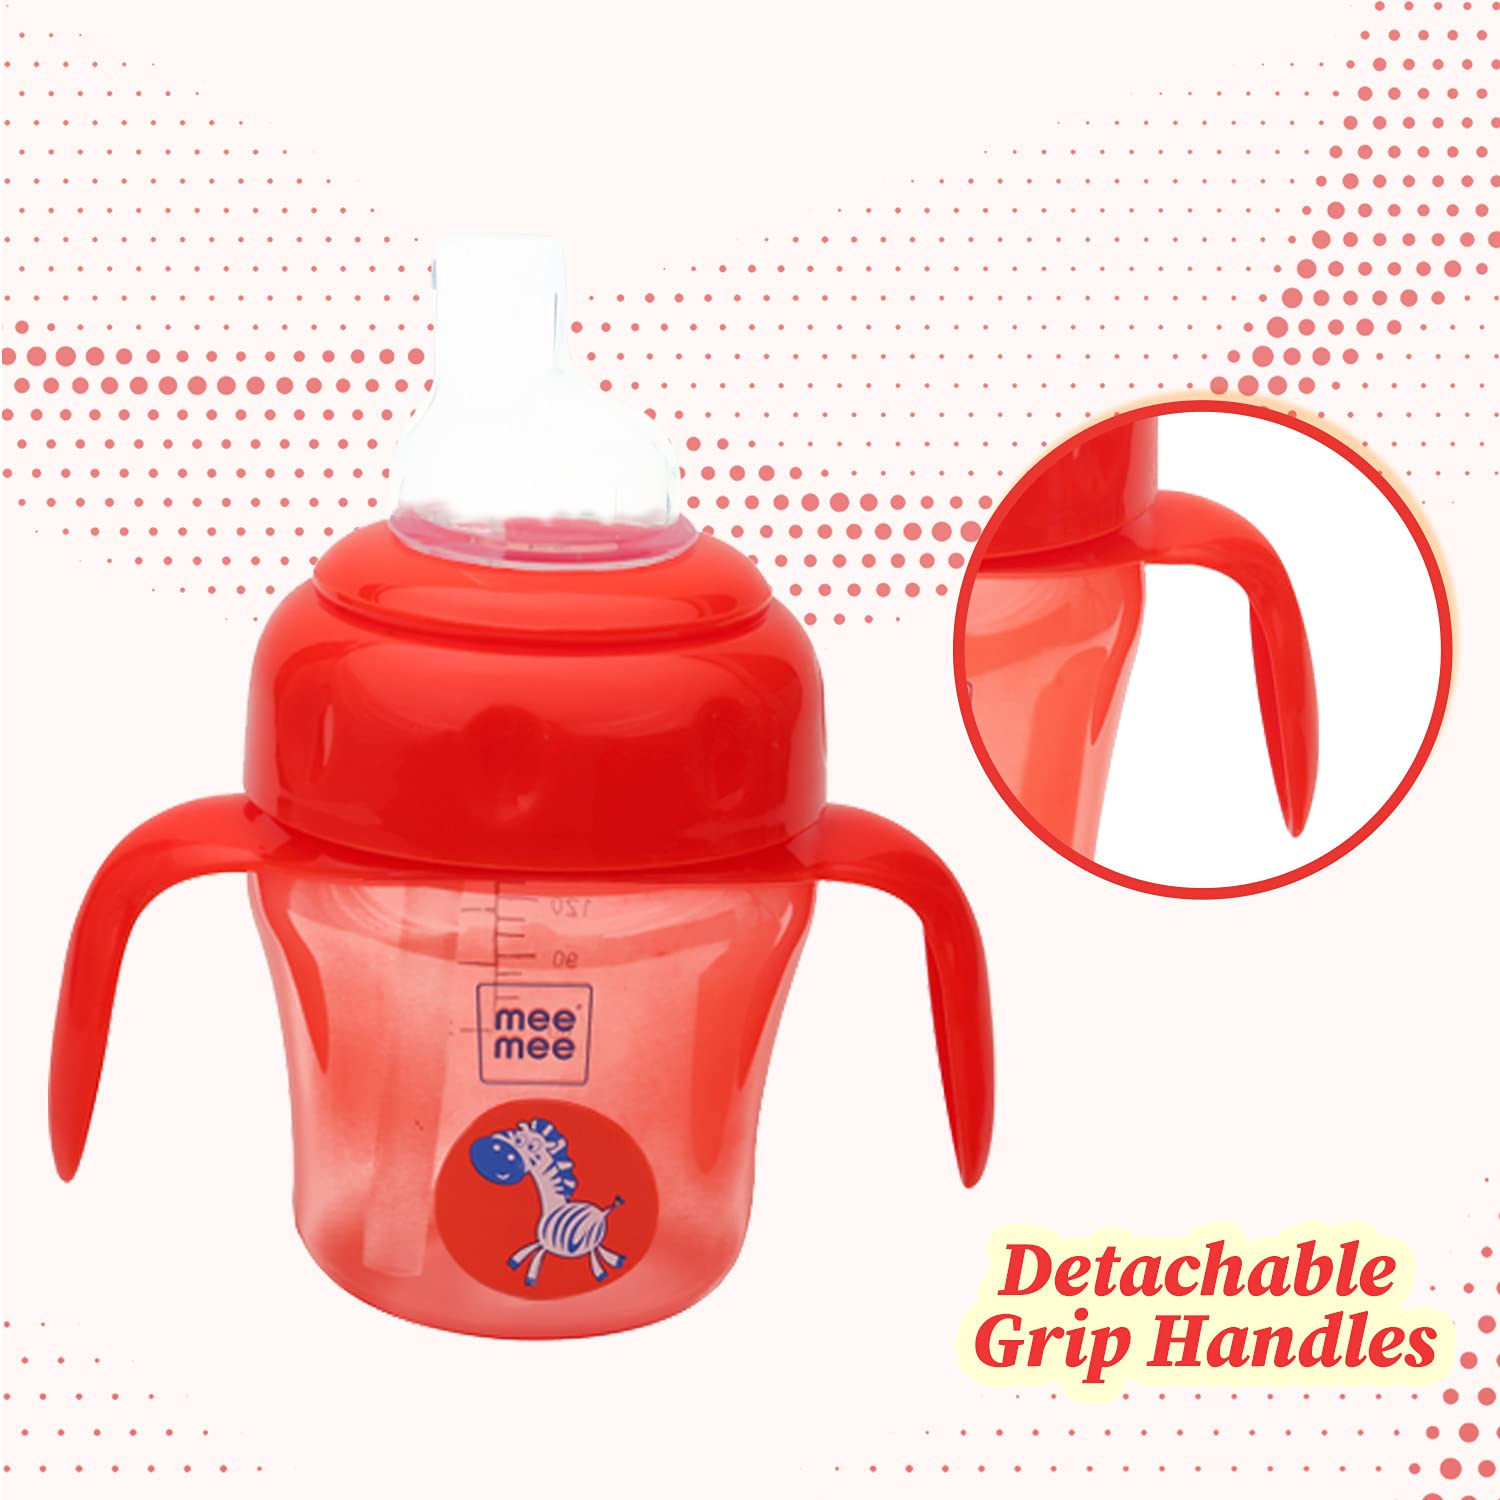 Mee Mee 2-in-1 Spout & Straw Sipper Cup 150ml